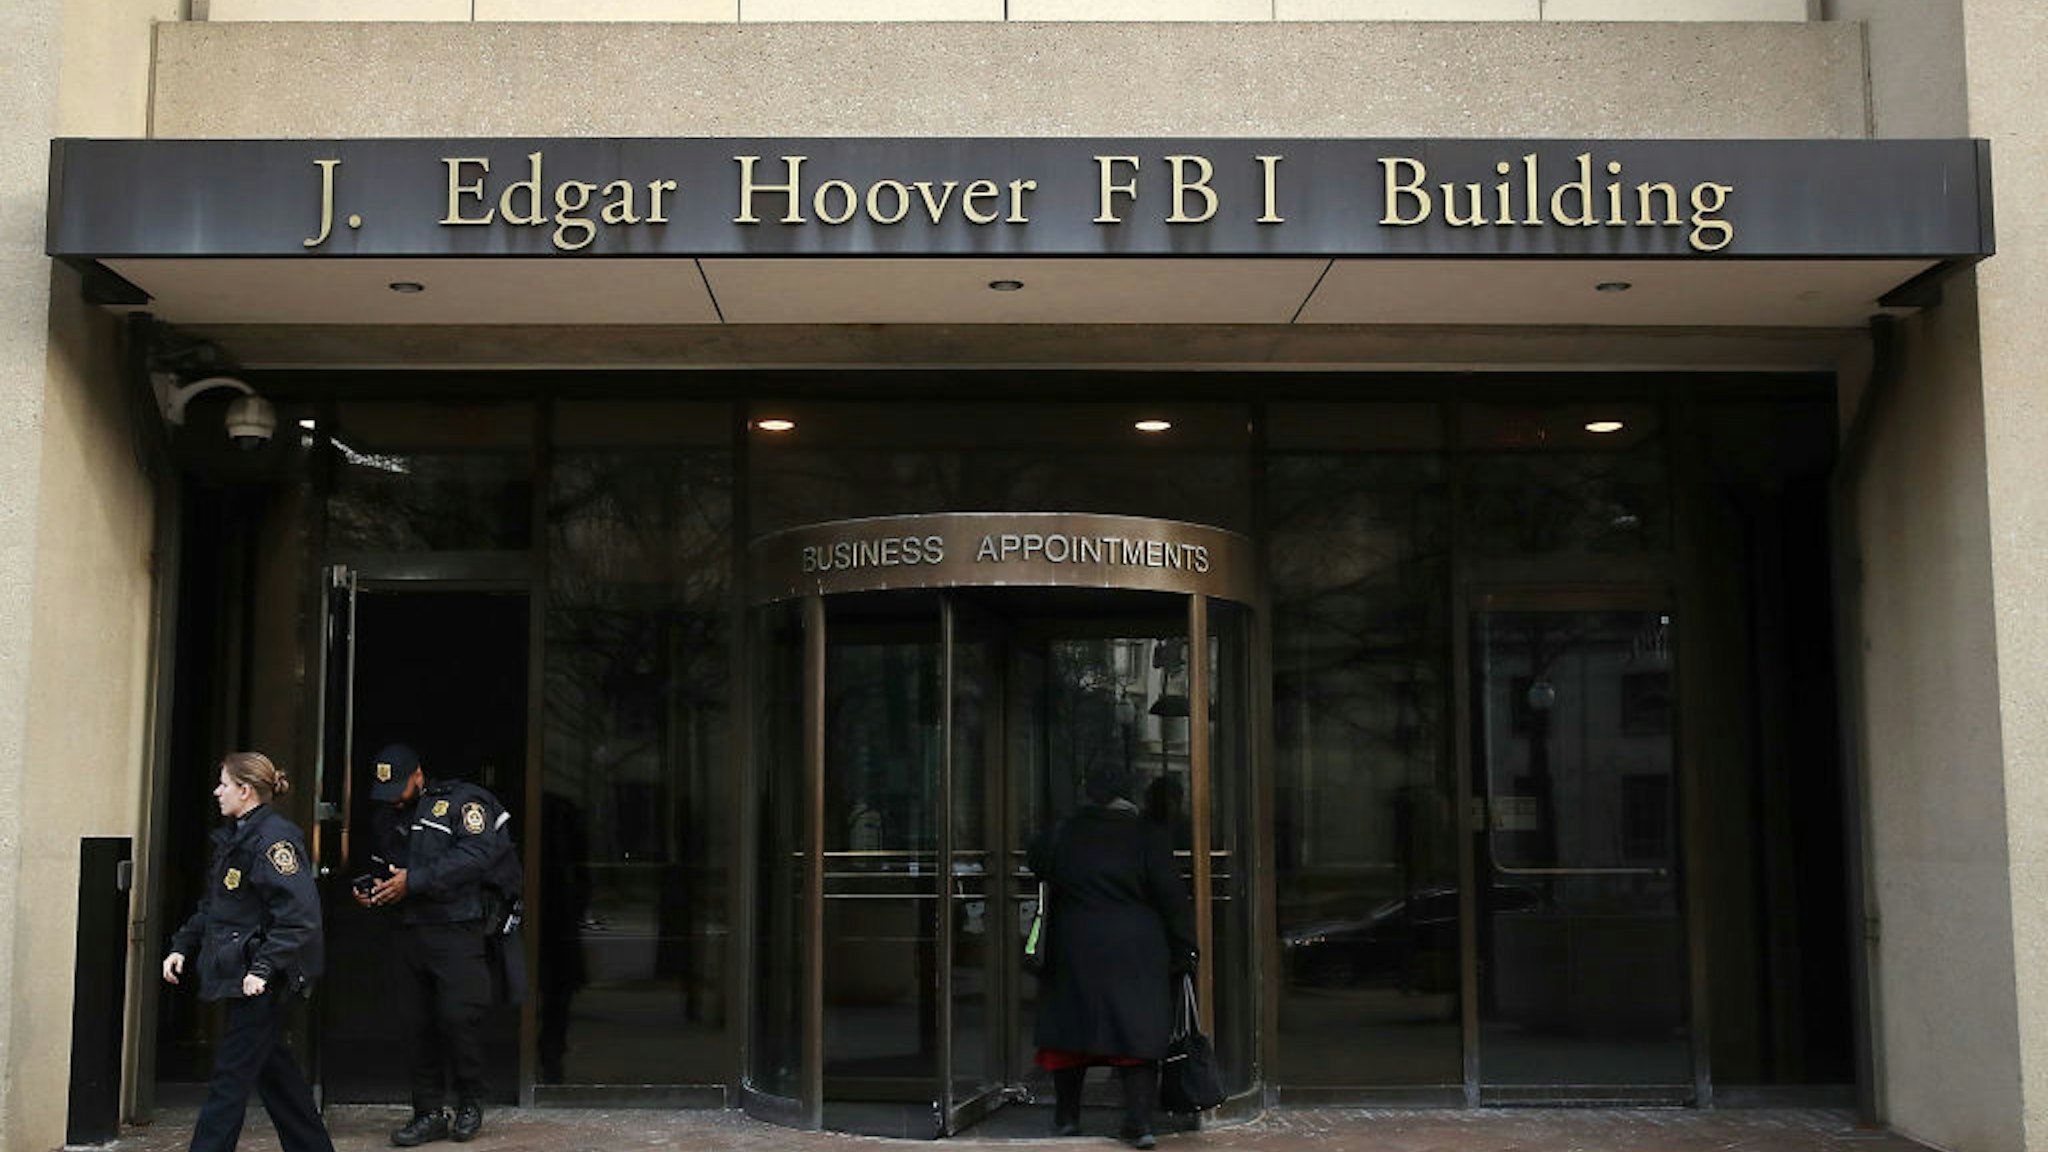 law enforcement officers walk out of the J. Edgar Hoover FBI Building on January 28, 2019 in Washington, DC.